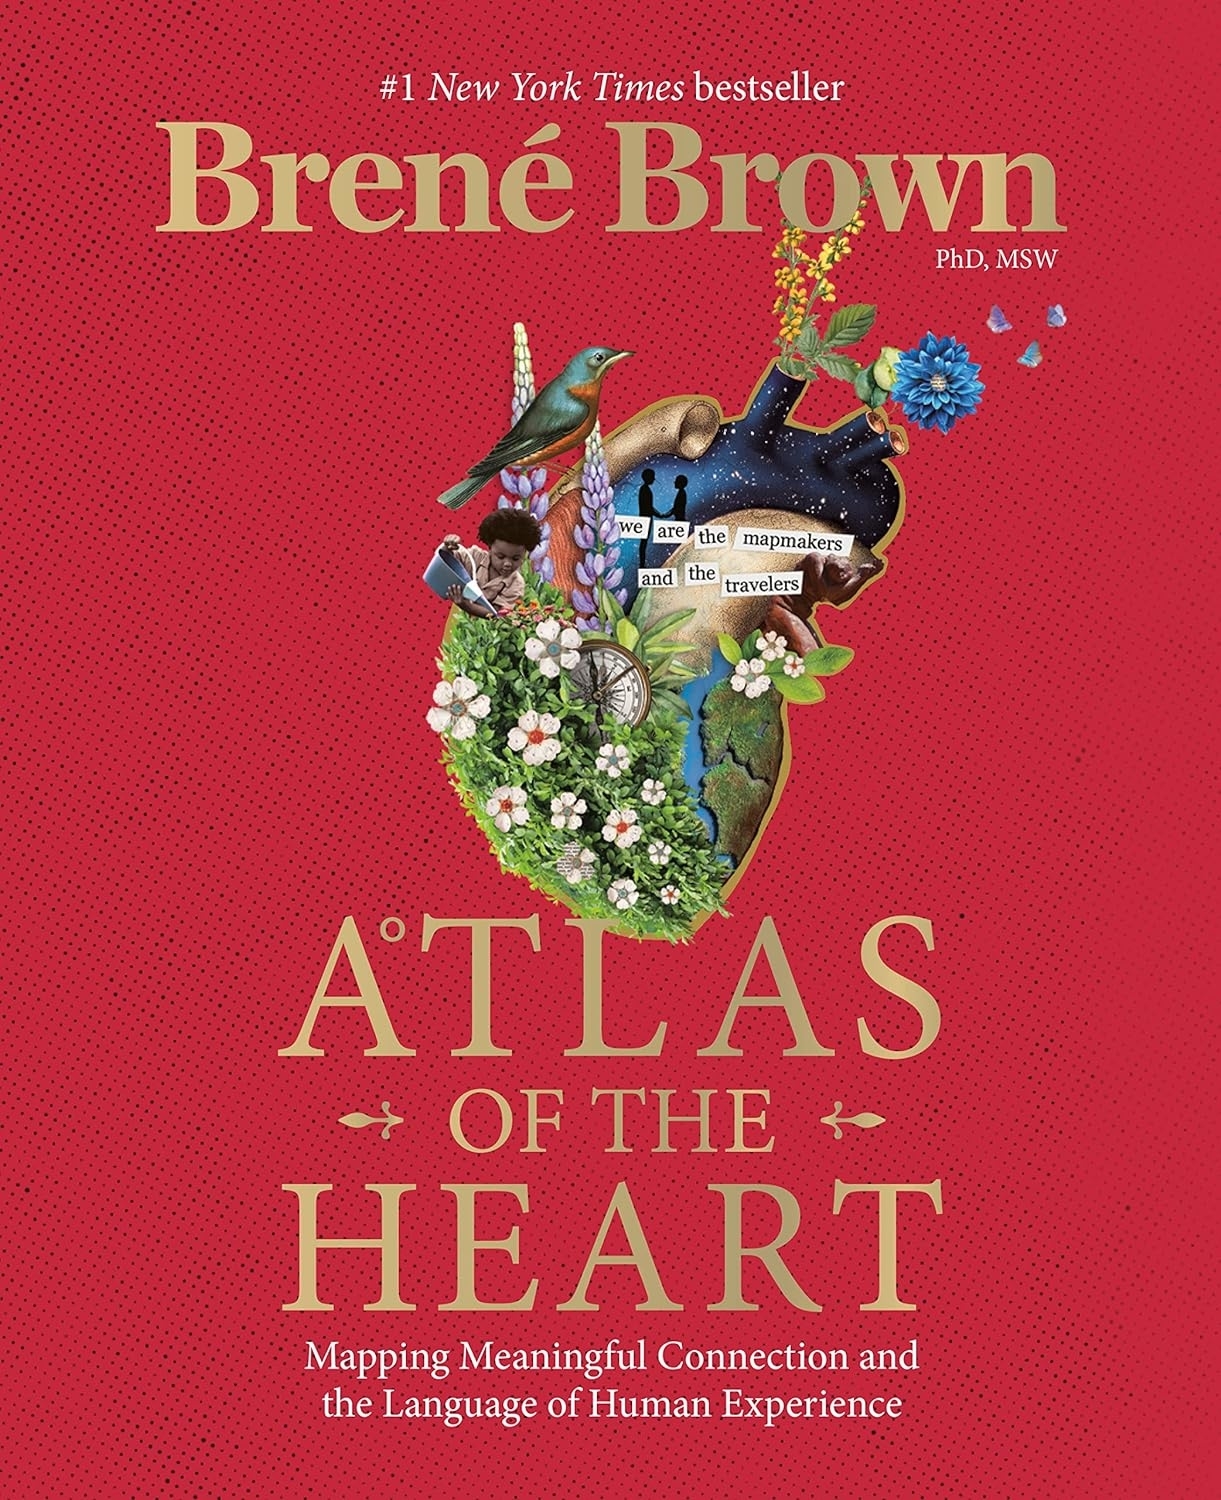 Cover of &quot;Atlas of the Heart&quot; by Brené Brown featuring an illustrated heart with various objects and plants